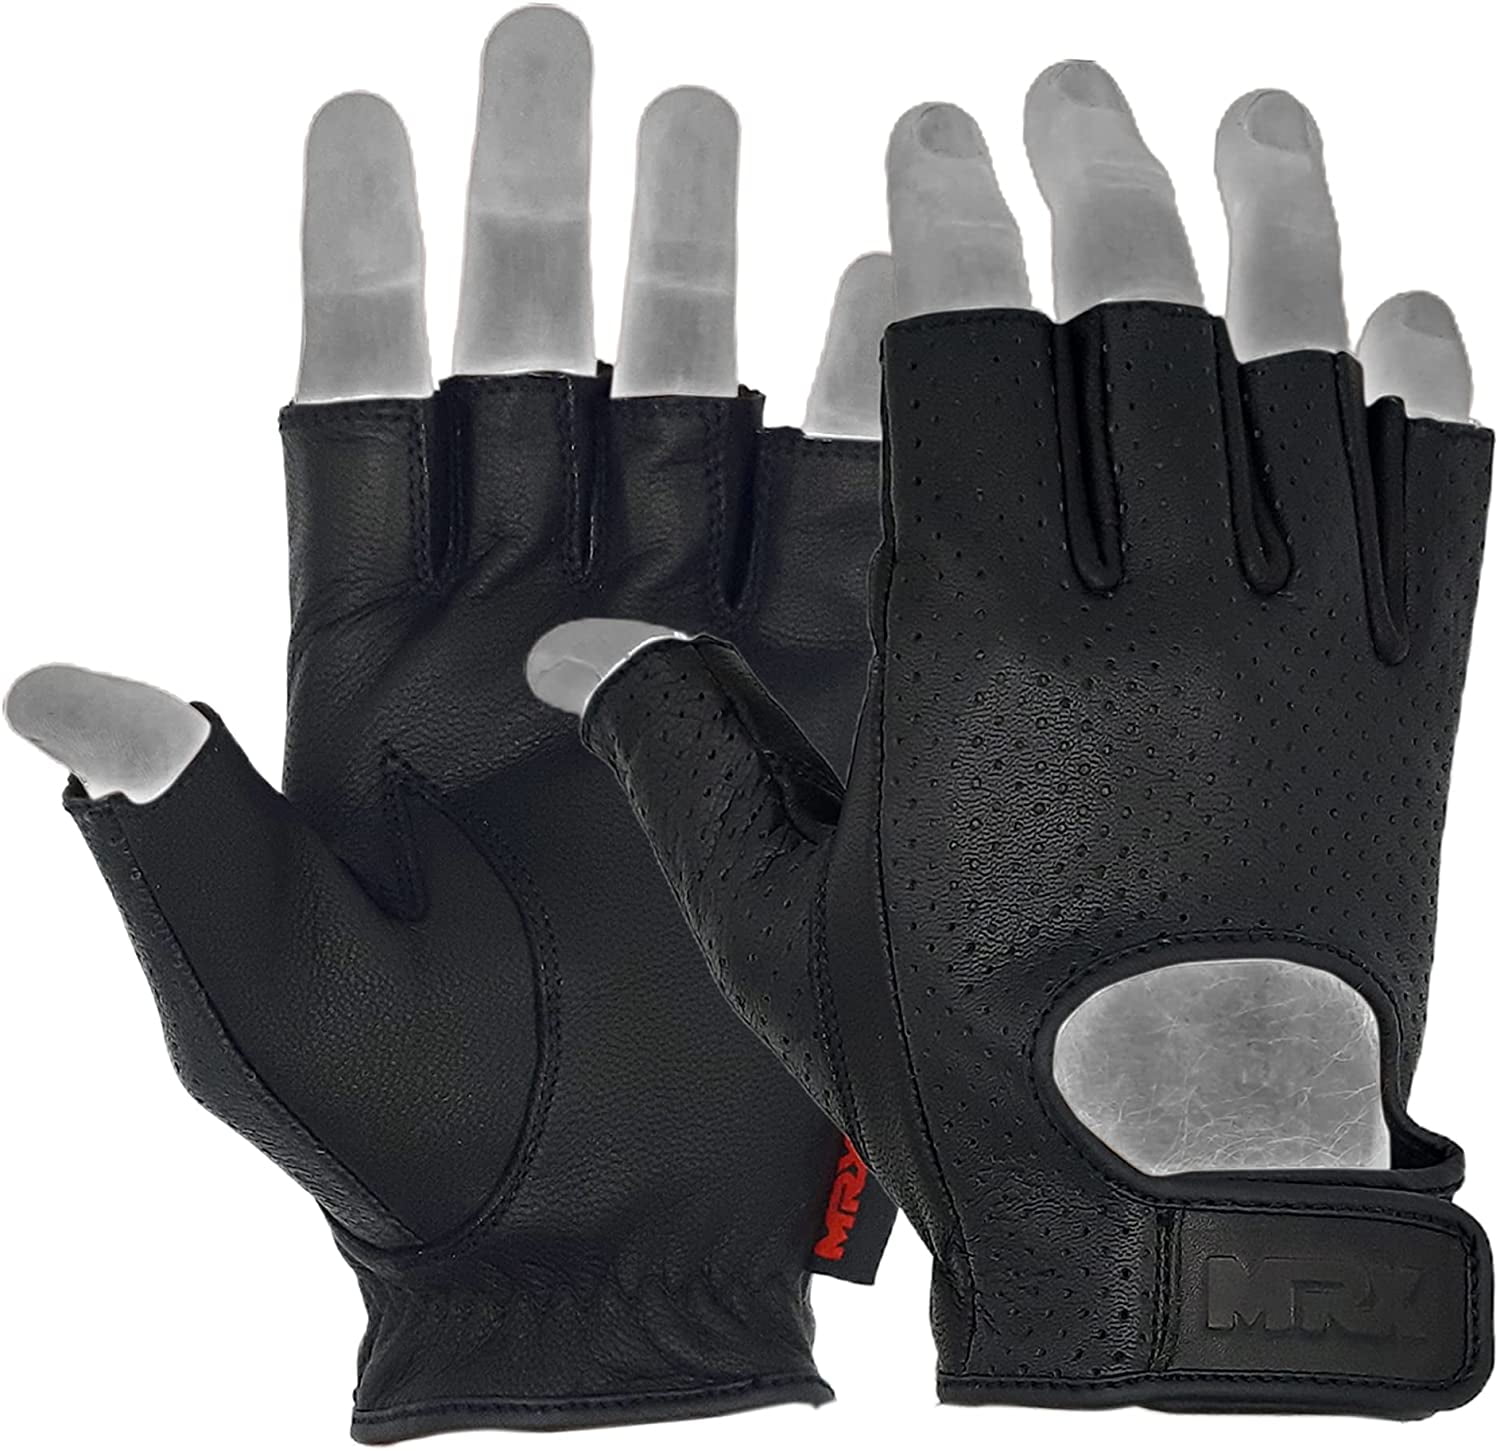 MENS MOTORCYCLE BUTTER SOFT WARM DRIVING GLOVES WITH ZIPPER LINED BIG SIZES 5X 